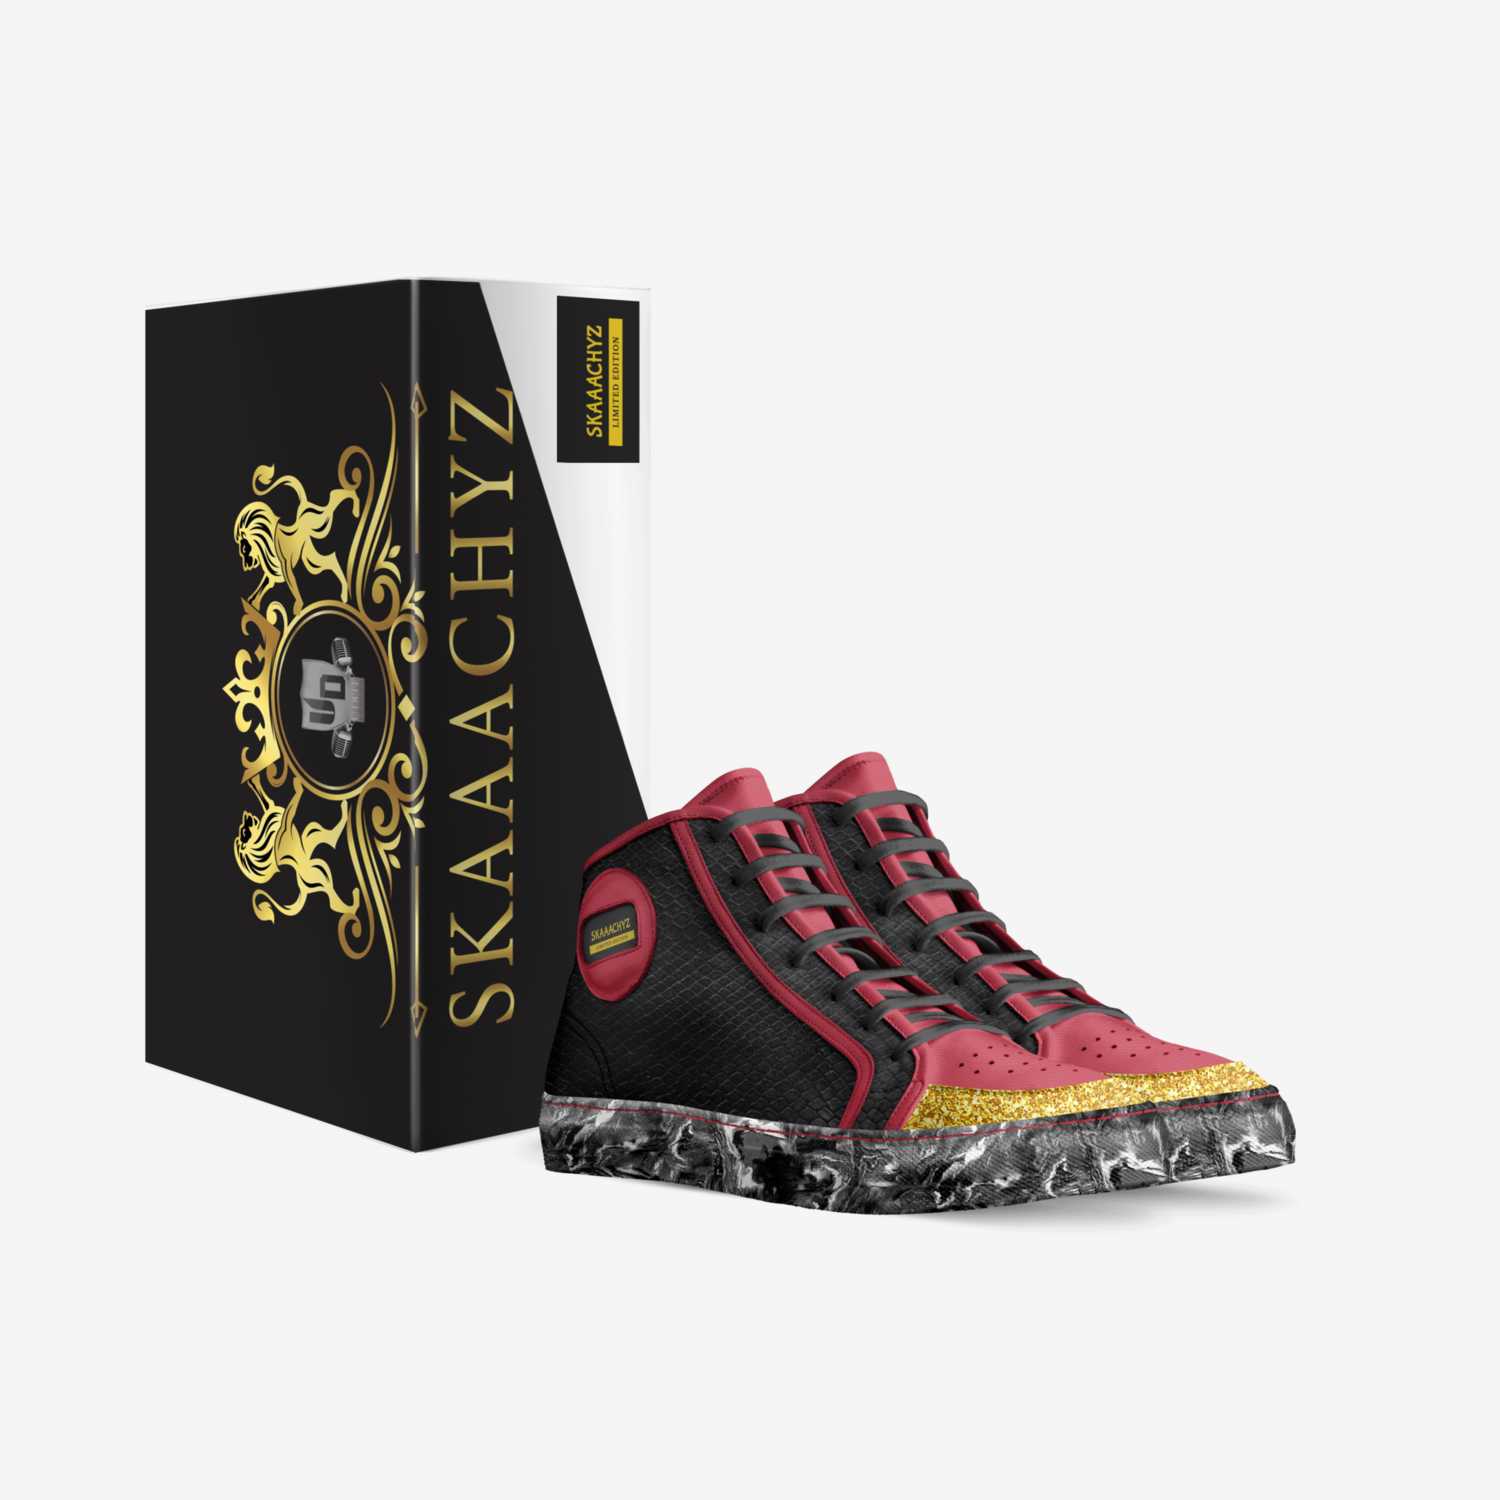 SKAAACHYZ custom made in Italy shoes by Curtis Knight | Box view